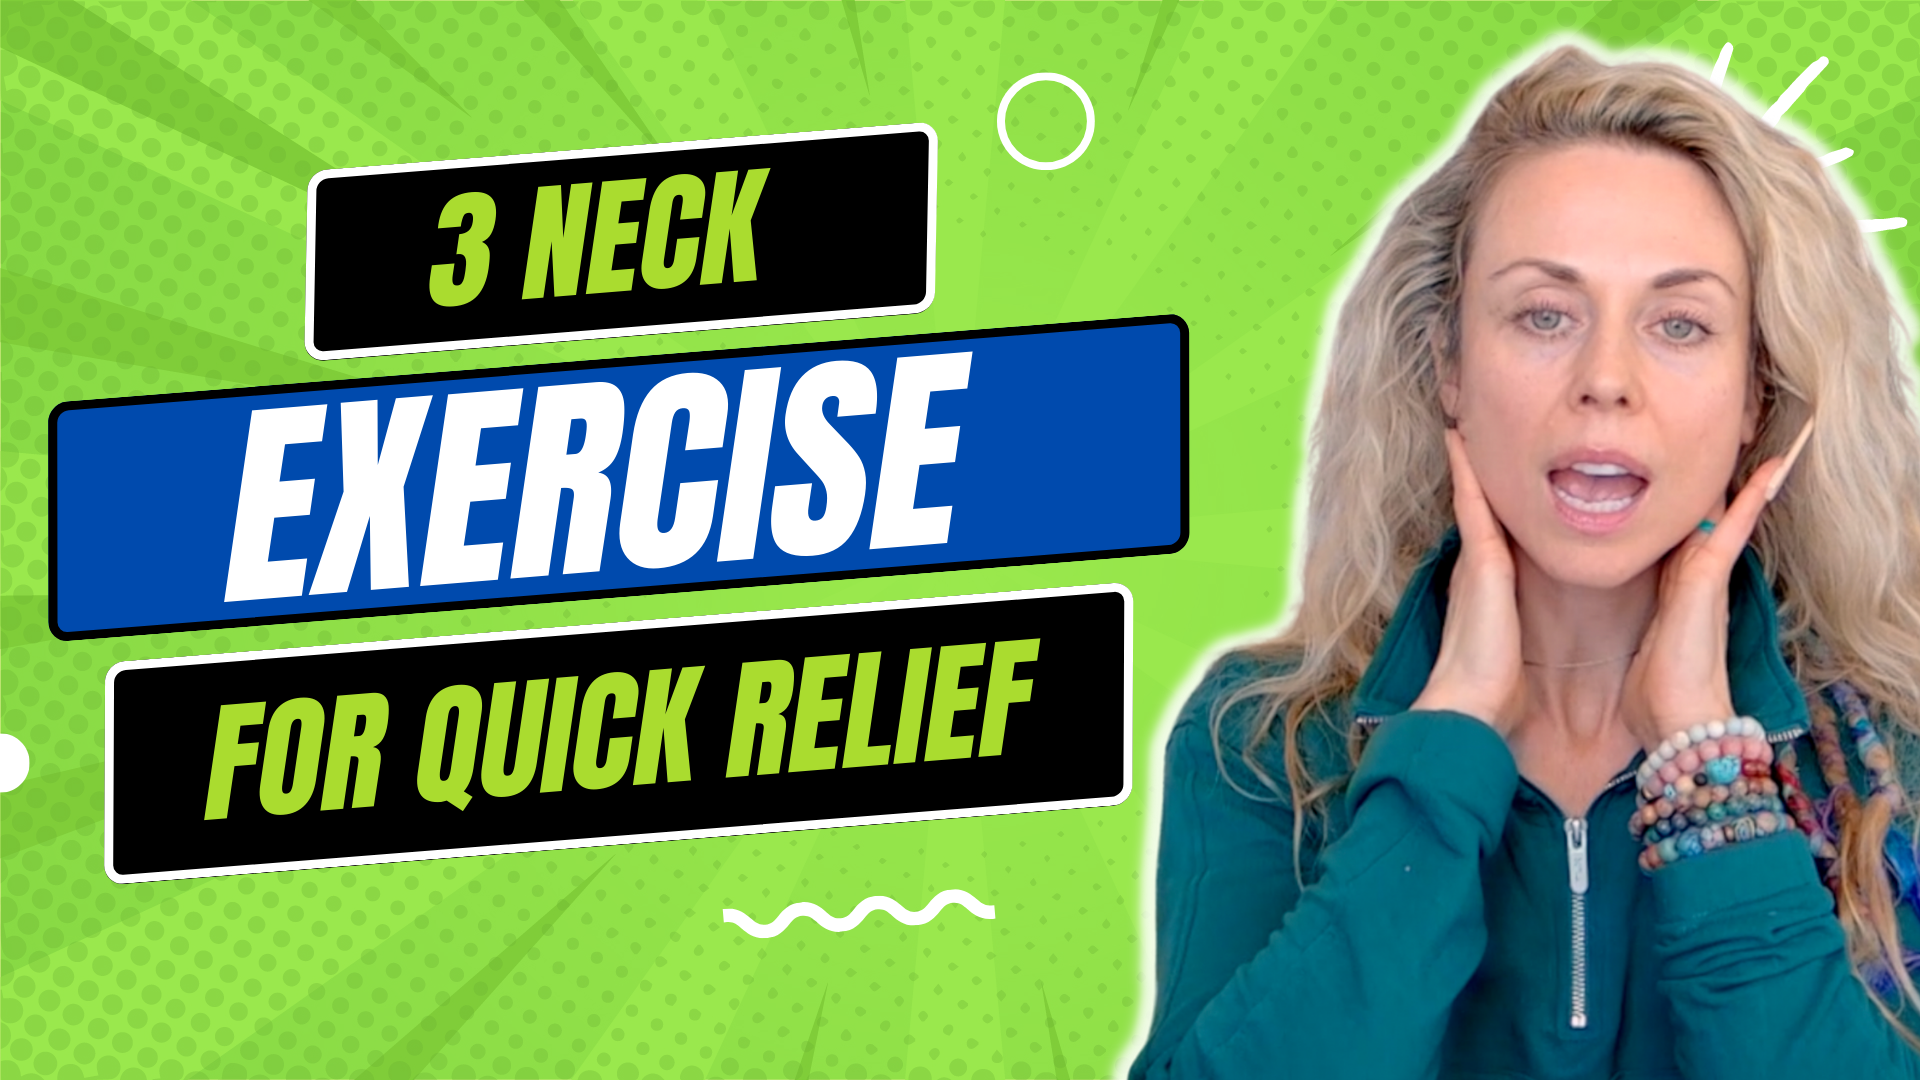 3 Neck Exercises for Quick Relief